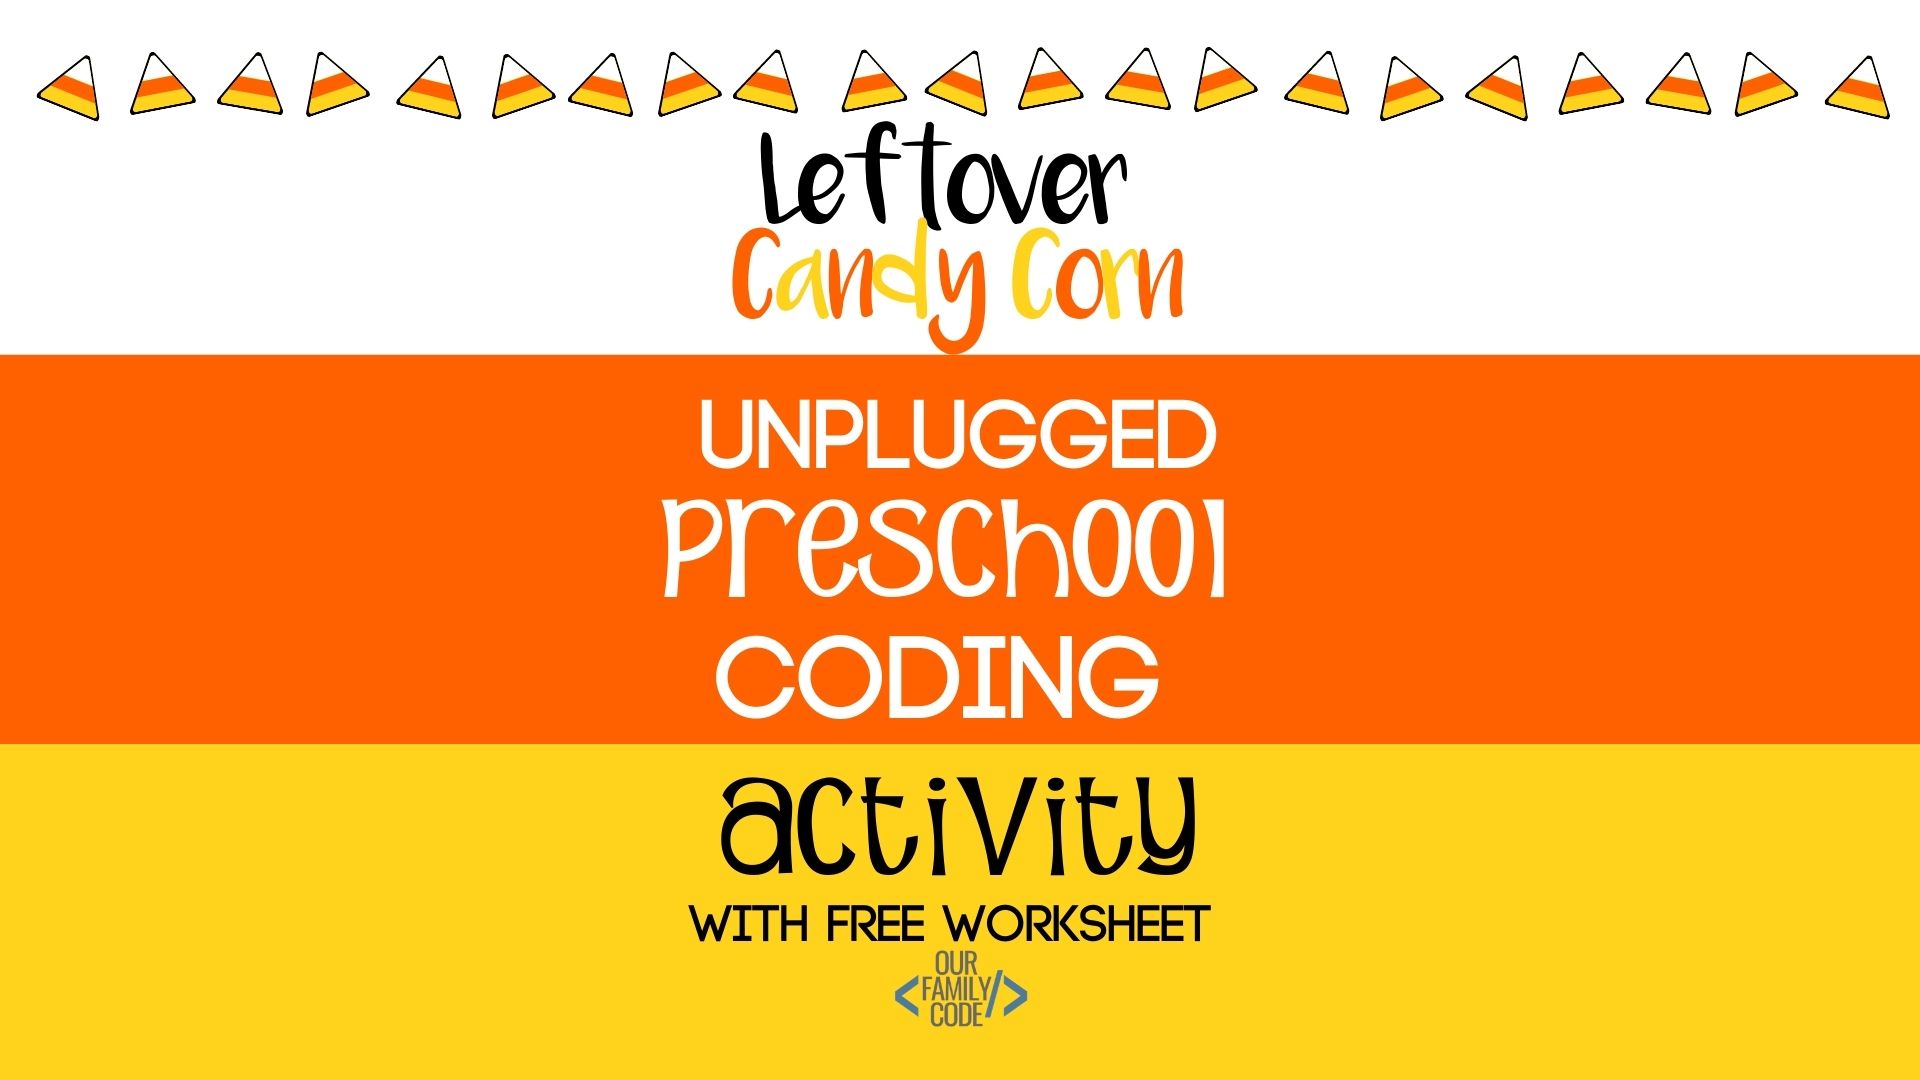 Use your leftover Halloween candy to learn how to code sequences with this unplugged coding preschool sequences activity. #teachkidstocode #fallworksheet #homeschool #kidcoders #preschoolmath 